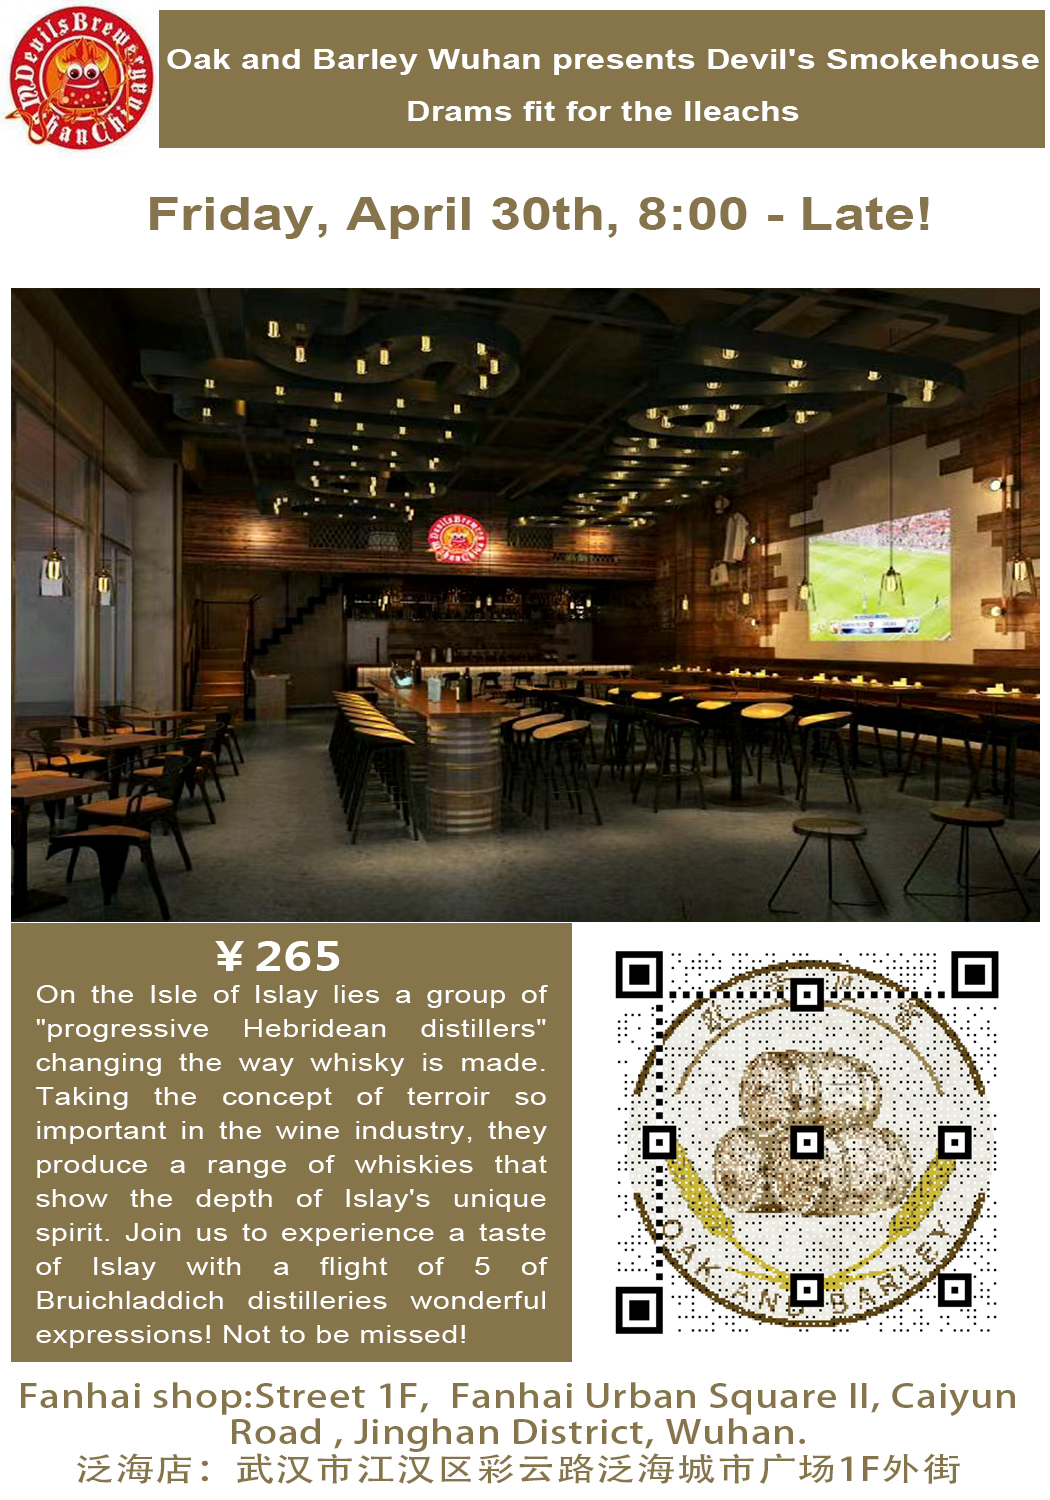 Oak and Barley Wuhan presents Devil’s Smokehouse-Drams fit for the Ileachs